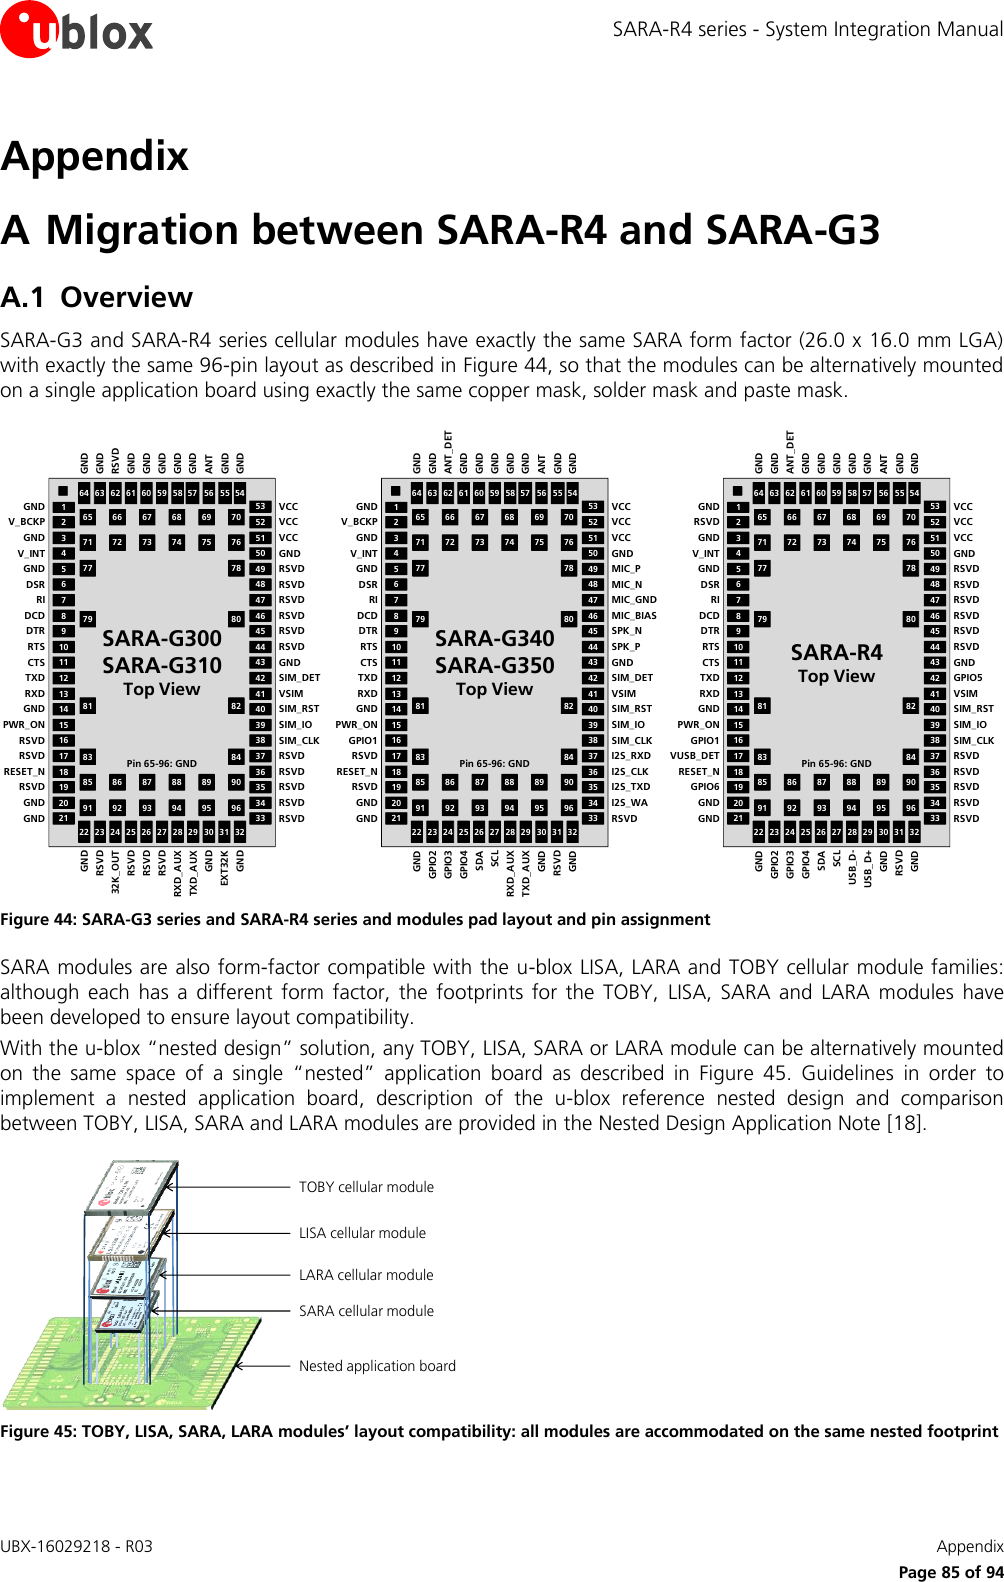 SARA-R4 series - System Integration Manual UBX-16029218 - R03    Appendix      Page 85 of 94 Appendix A Migration between SARA-R4 and SARA-G3 A.1 Overview SARA-G3 and SARA-R4 series cellular modules have exactly the same SARA form factor (26.0 x 16.0 mm LGA) with exactly the same 96-pin layout as described in Figure 44, so that the modules can be alternatively mounted on a single application board using exactly the same copper mask, solder mask and paste mask. 64 63 61 60 58 57 55 5422 23 25 26 28 29 31 3211108754212119181615131243444647495052533335363839414265 66 67 68 69 7071 72 73 74 75 7677 7879 8081 8283 8485 86 87 88 89 9091 92 93 94 95 96CTSRTSDCDRIV_INTV_BCKPGNDRSVDRESET_NRSVDPWR_ONRXDTXD32017149624 27 305148454037345962 56GNDGNDDSRDTRGNDRSVDGNDGNDRXD_AUXTXD_AUXEXT32KGNDRSVD32K_OUTRSVDRSVDRSVDGNDGNDGNDRSVDRSVDRSVDRSVDGNDVCCVCCRSVDRSVDRSVDSIM_CLKSIM_IOVSIMSIM_DETVCCRSVDRSVDSIM_RSTRSVDRSVDGNDGNDGNDGNDGNDGNDGNDGNDGNDRSVDANTSARA-G300 SARA-G310Top ViewPin 65-96: GND64 63 61 60 58 57 55 5422 23 25 26 28 29 31 3211108754212119181615131243444647495052533335363839414265 66 67 68 69 7071 72 73 74 75 7677 7879 8081 8283 8485 86 87 88 89 9091 92 93 94 95 96CTSRTSDCDRIV_INTV_BCKPGNDRSVDRESET_NGPIO1PWR_ONRXDTXD32017149624 27 305148454037345962 56GNDGNDDSRDTRGNDRSVDGNDGNDRXD_AUXTXD_AUXRSVDGNDGPIO2GPIO3SDASCLGPIO4GNDGNDGNDSPK_PMIC_BIASMIC_GNDMIC_PGNDVCCVCCRSVDI2S_TXDI2S_CLKSIM_CLKSIM_IOVSIMSIM_DETVCCMIC_NSPK_NSIM_RSTI2S_RXDI2S_WAGNDGNDGNDGNDGNDGNDGNDGNDGNDANT_DETANTSARA-G340SARA-G350Top ViewPin 65-96: GND64 63 61 60 58 57 55 5422 23 25 26 28 29 31 3211108754212119181615131243444647495052533335363839414265 66 67 68 69 7071 72 73 74 75 7677 7879 8081 8283 8485 86 87 88 89 9091 92 93 94 95 96CTSRTSDCDRIV_INTRSVDGNDGPIO6RESET_NGPIO1PWR_ONRXDTXD32017149624 27 305148454037345962 56GNDGNDDSRDTRGNDVUSB_DETGNDGNDUSB_D-USB_D+RSVDGNDGPIO2GPIO3SDASCLGPIO4GNDGNDGNDRSVDRSVDRSVDRSVDGNDVCCVCCRSVDRSVDRSVDSIM_CLKSIM_IOVSIMGPIO5VCCRSVDRSVDSIM_RSTRSVDRSVDGNDGNDGNDGNDGNDGNDGNDGNDGNDANT_DETANTSARA-R4Top ViewPin 65-96: GND Figure 44: SARA-G3 series and SARA-R4 series and modules pad layout and pin assignment SARA modules are also form-factor compatible with the u-blox LISA, LARA and TOBY cellular module families: although  each  has  a  different  form  factor,  the  footprints  for the  TOBY,  LISA,  SARA  and  LARA  modules  have been developed to ensure layout compatibility. With the u-blox “nested design” solution, any TOBY, LISA, SARA or LARA module can be alternatively mounted on  the  same  space  of  a  single  “nested”  application  board  as  described  in  Figure  45.  Guidelines  in  order  to implement  a  nested  application  board,  description  of  the  u-blox  reference  nested  design  and  comparison between TOBY, LISA, SARA and LARA modules are provided in the Nested Design Application Note [18].  LISA cellular moduleLARA cellular moduleSARA cellular moduleNested application boardTOBY cellular module Figure 45: TOBY, LISA, SARA, LARA modules’ layout compatibility: all modules are accommodated on the same nested footprint  